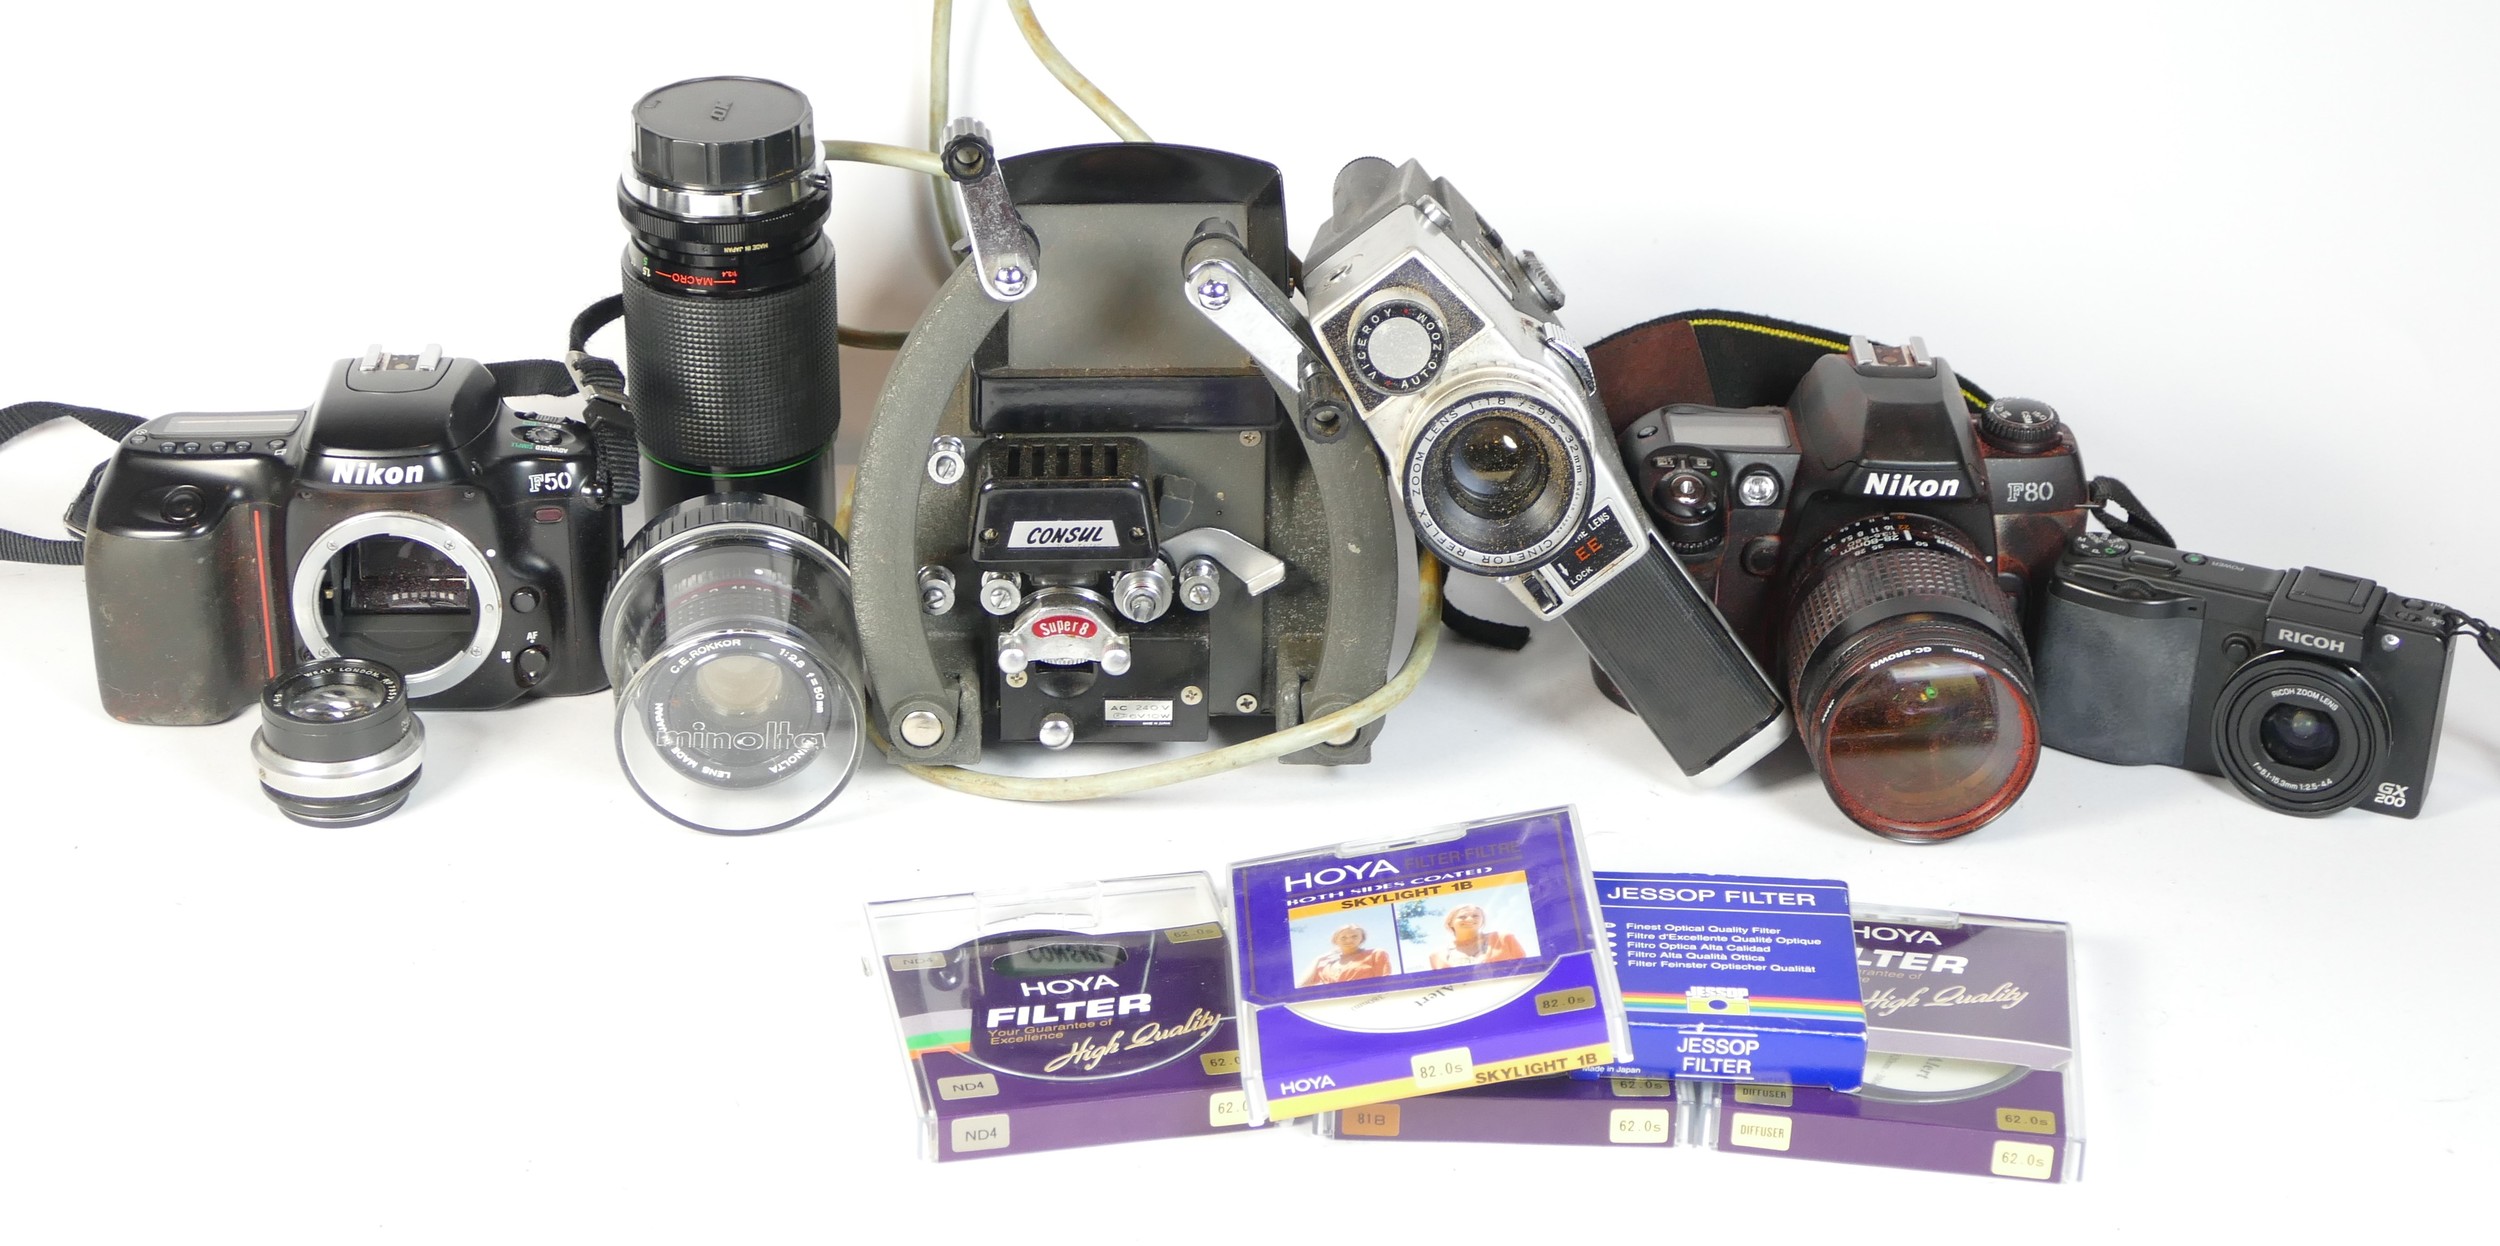 Two SLR vintage film cameras comprising of a Nikon F50 and a Nikon F80, together with a Ricoh